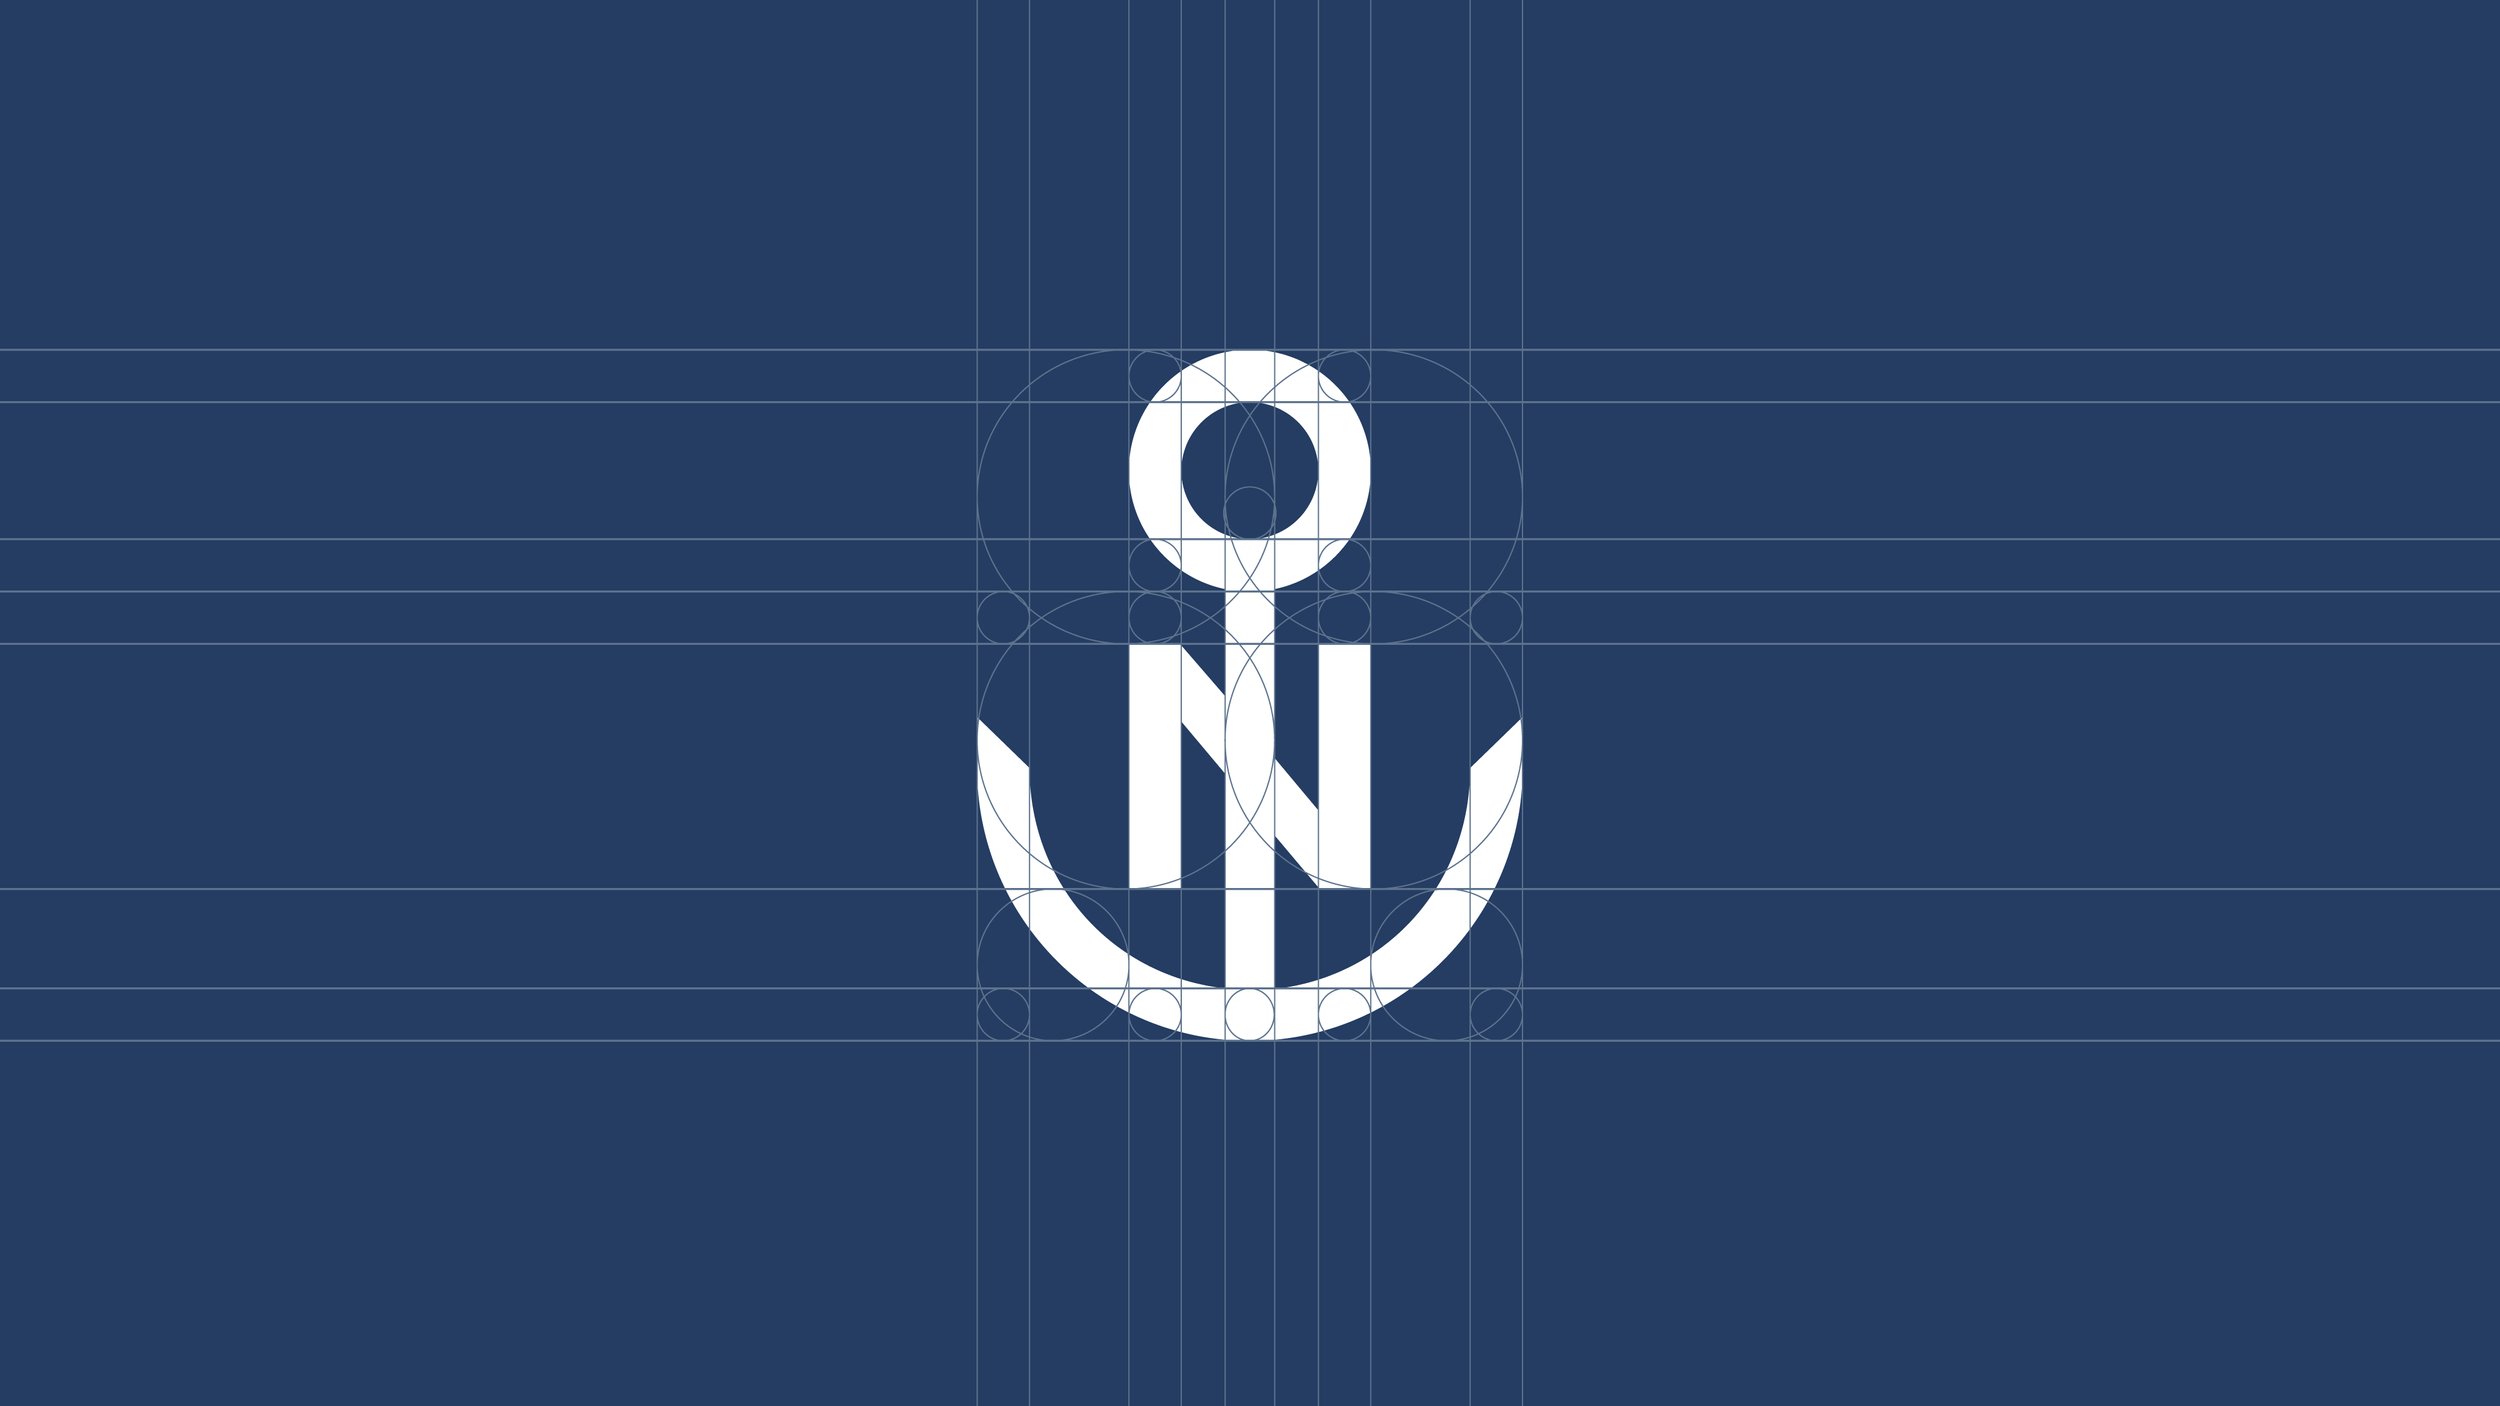 A new brand and identity for American fashion brand Old Navy